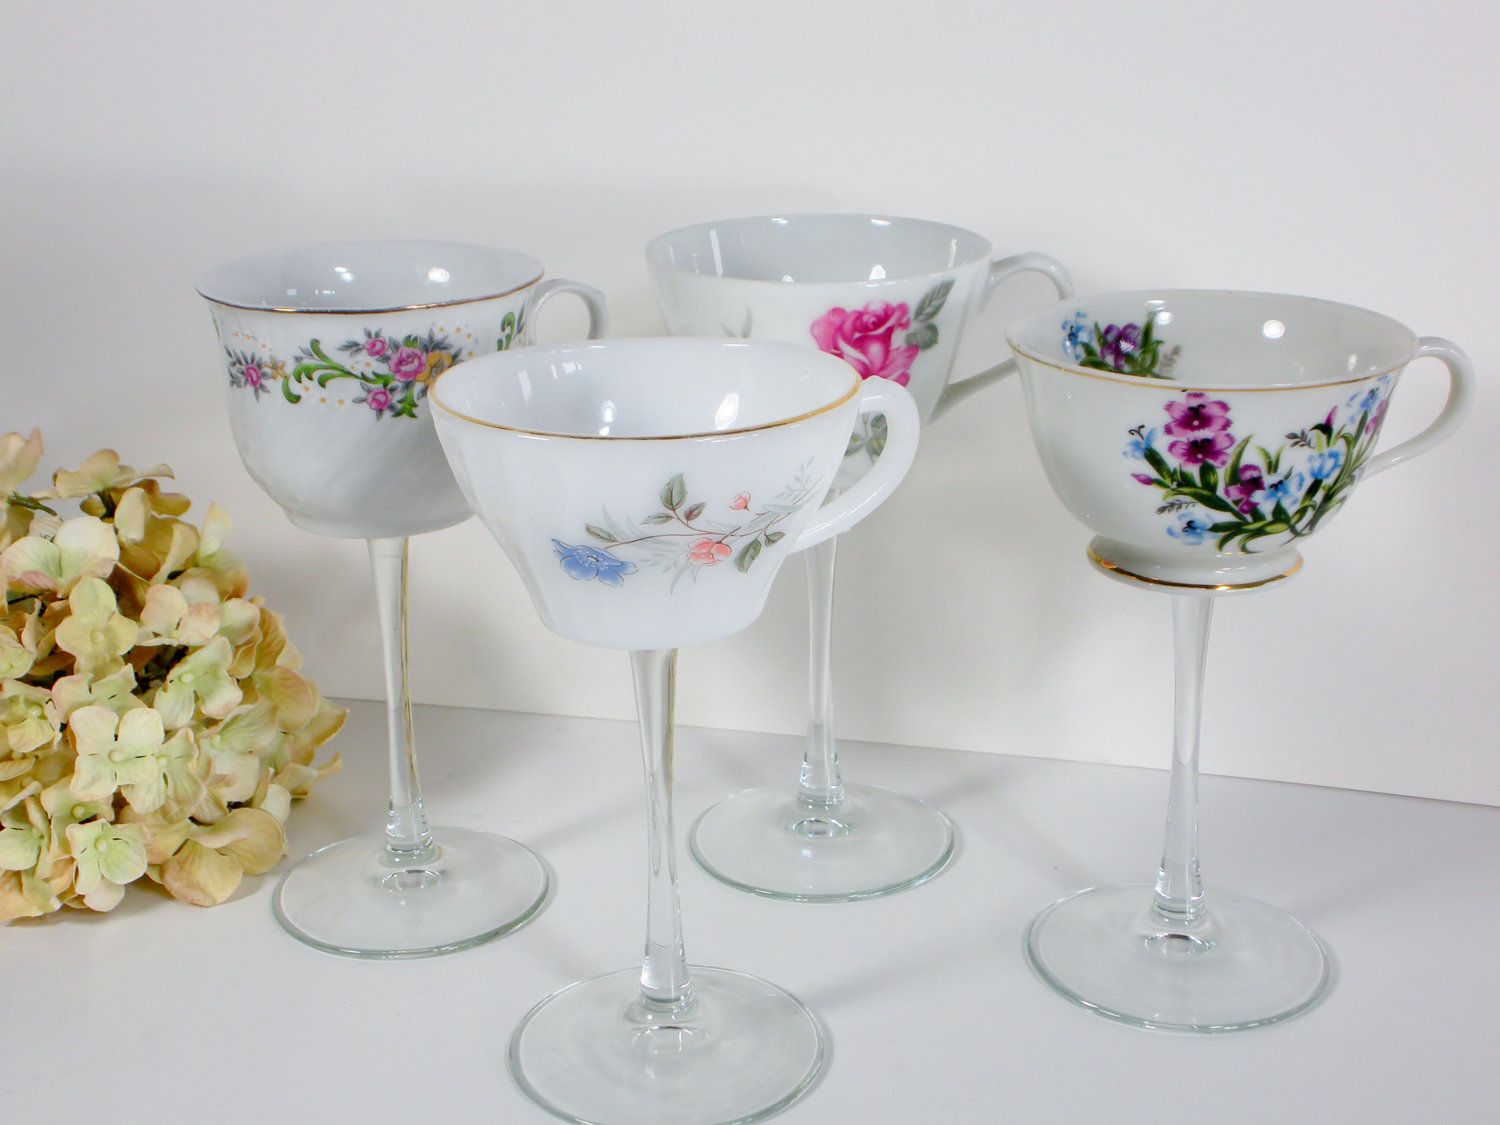 How To Make Teacup Wine Glasses